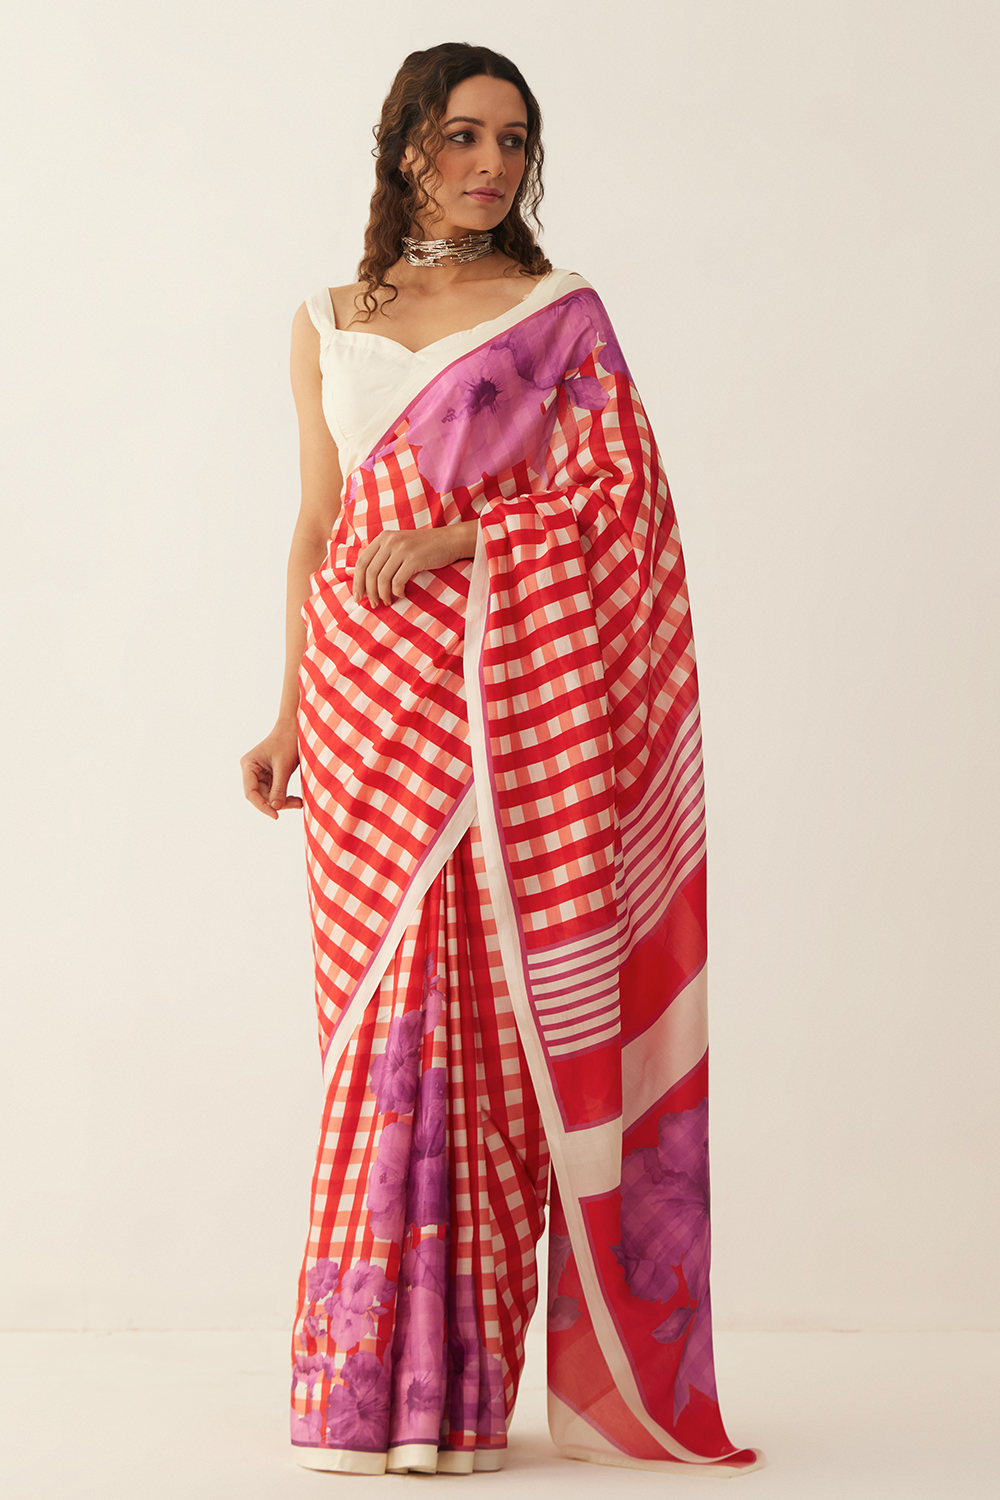 Red and Offwhite gingham checks floral mix silk saree